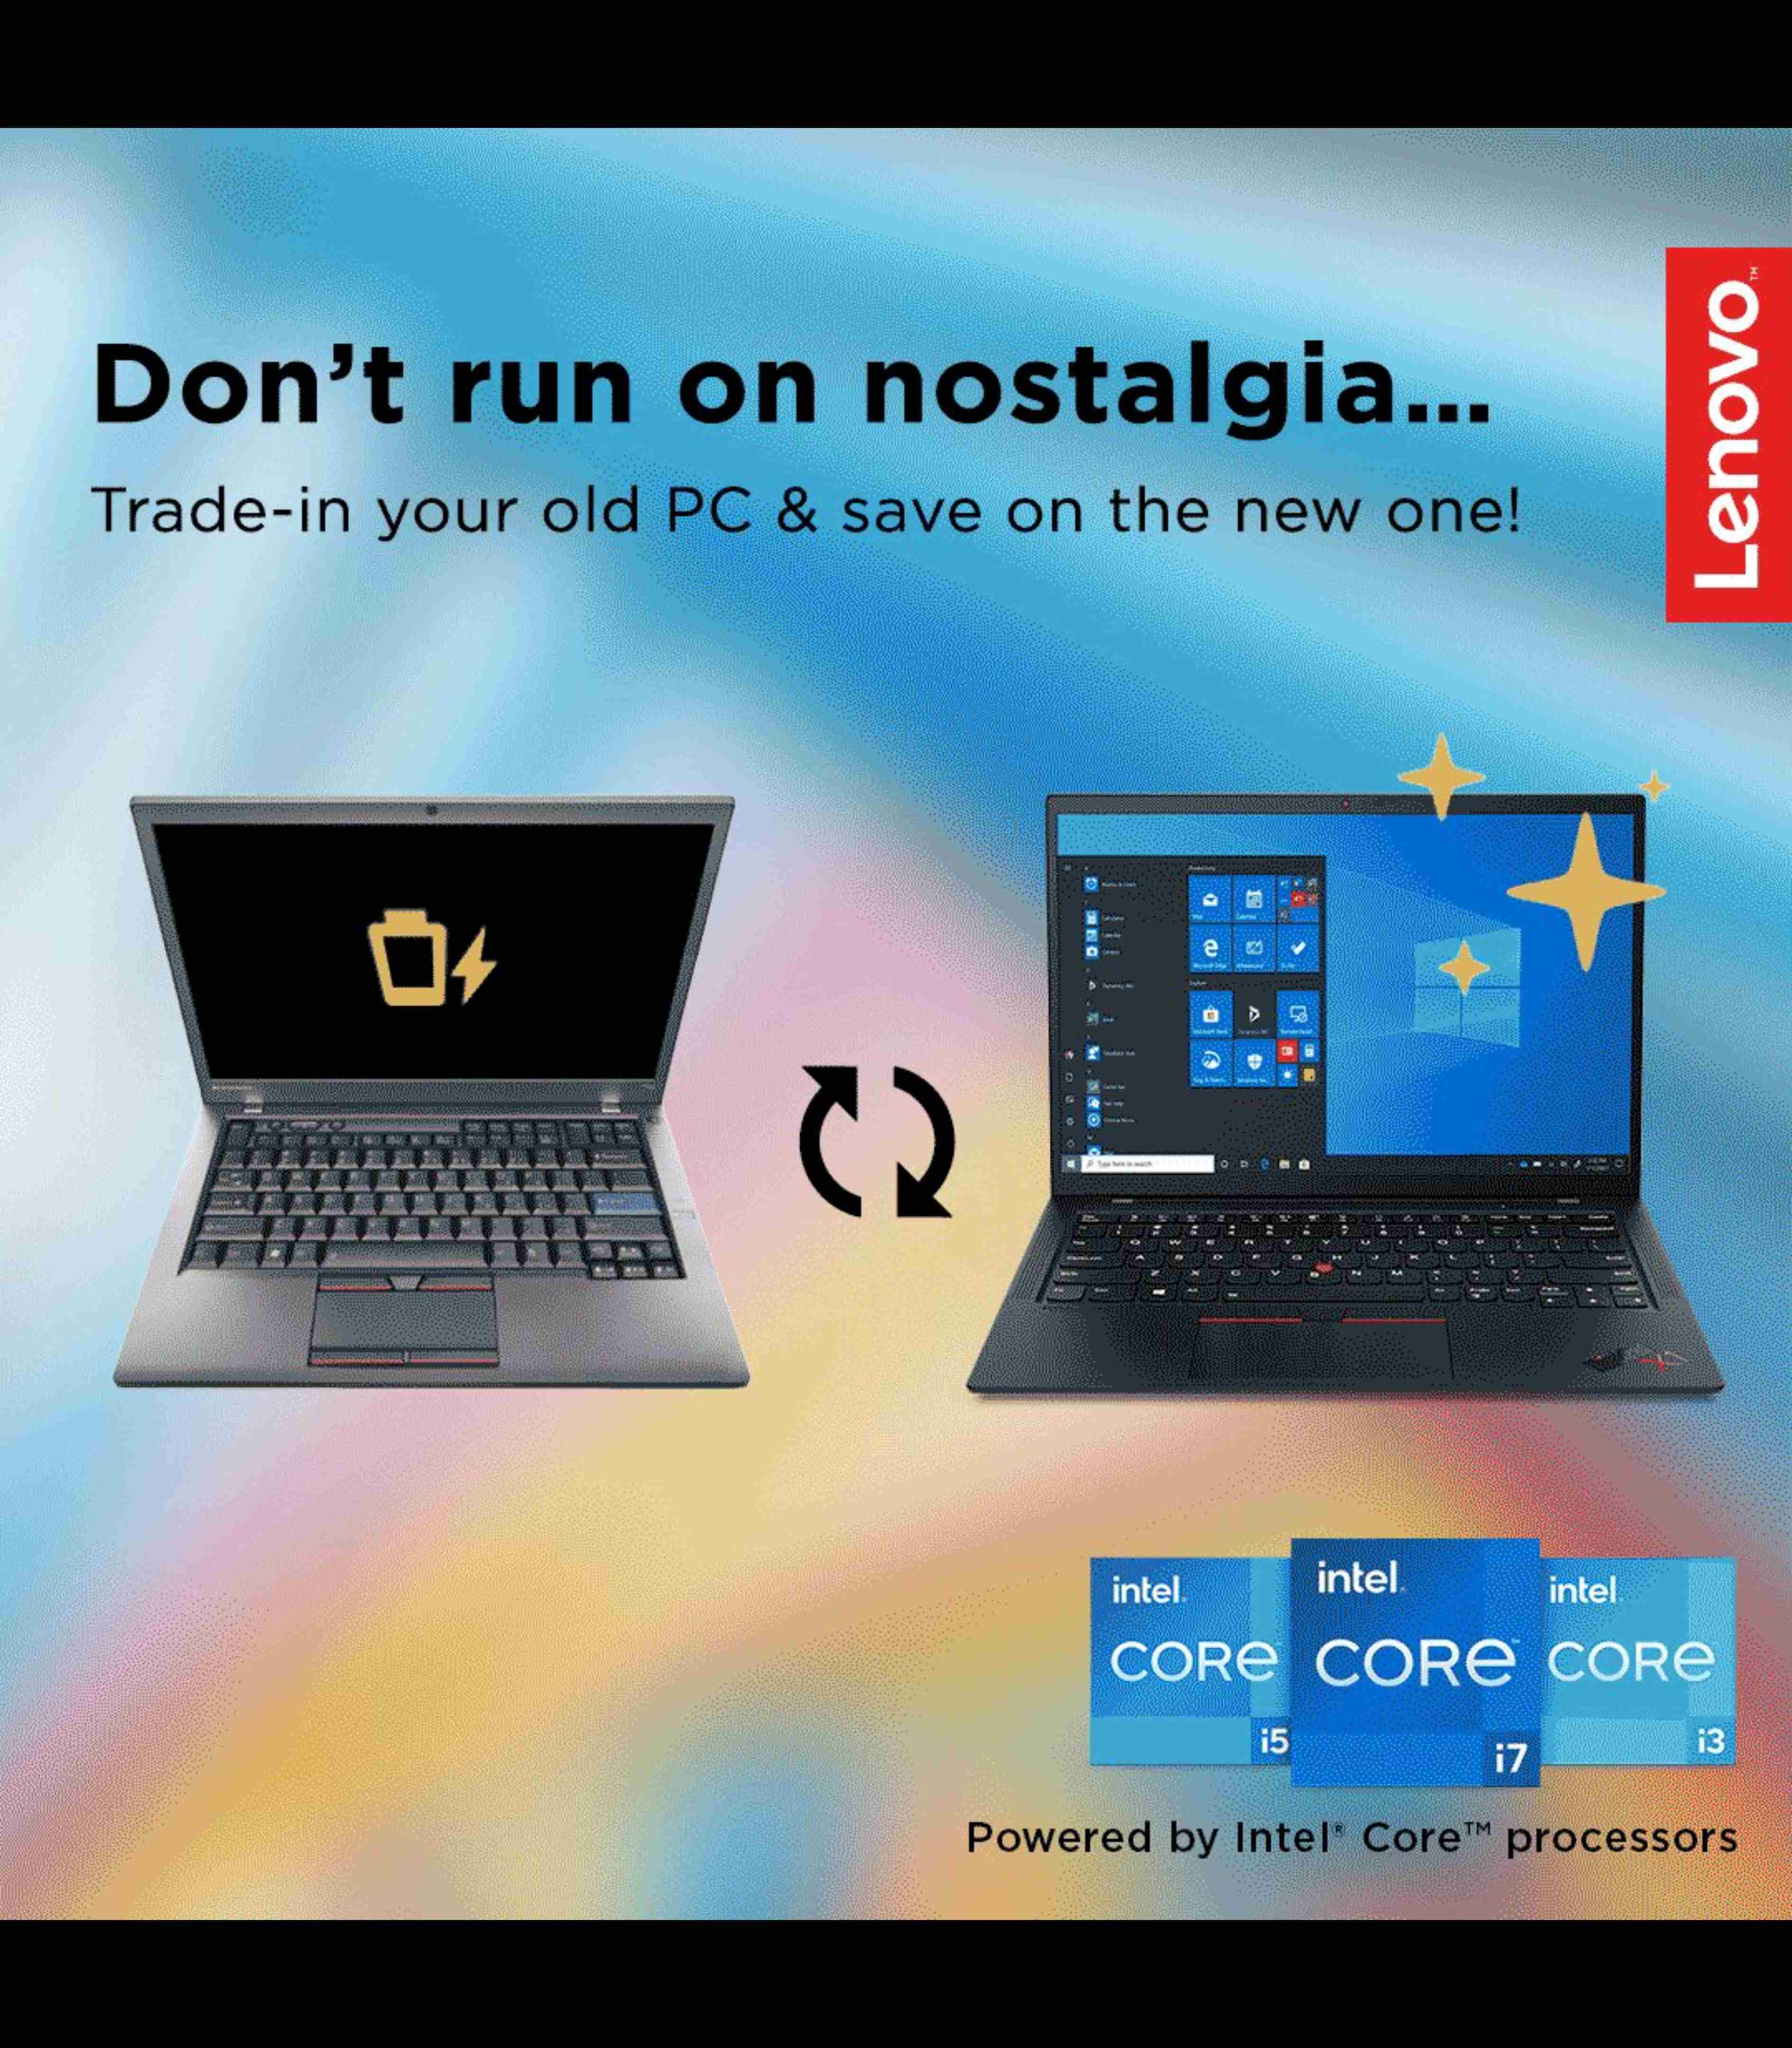 Lenovo get $500 instant credit when you trade in your old device from any brand